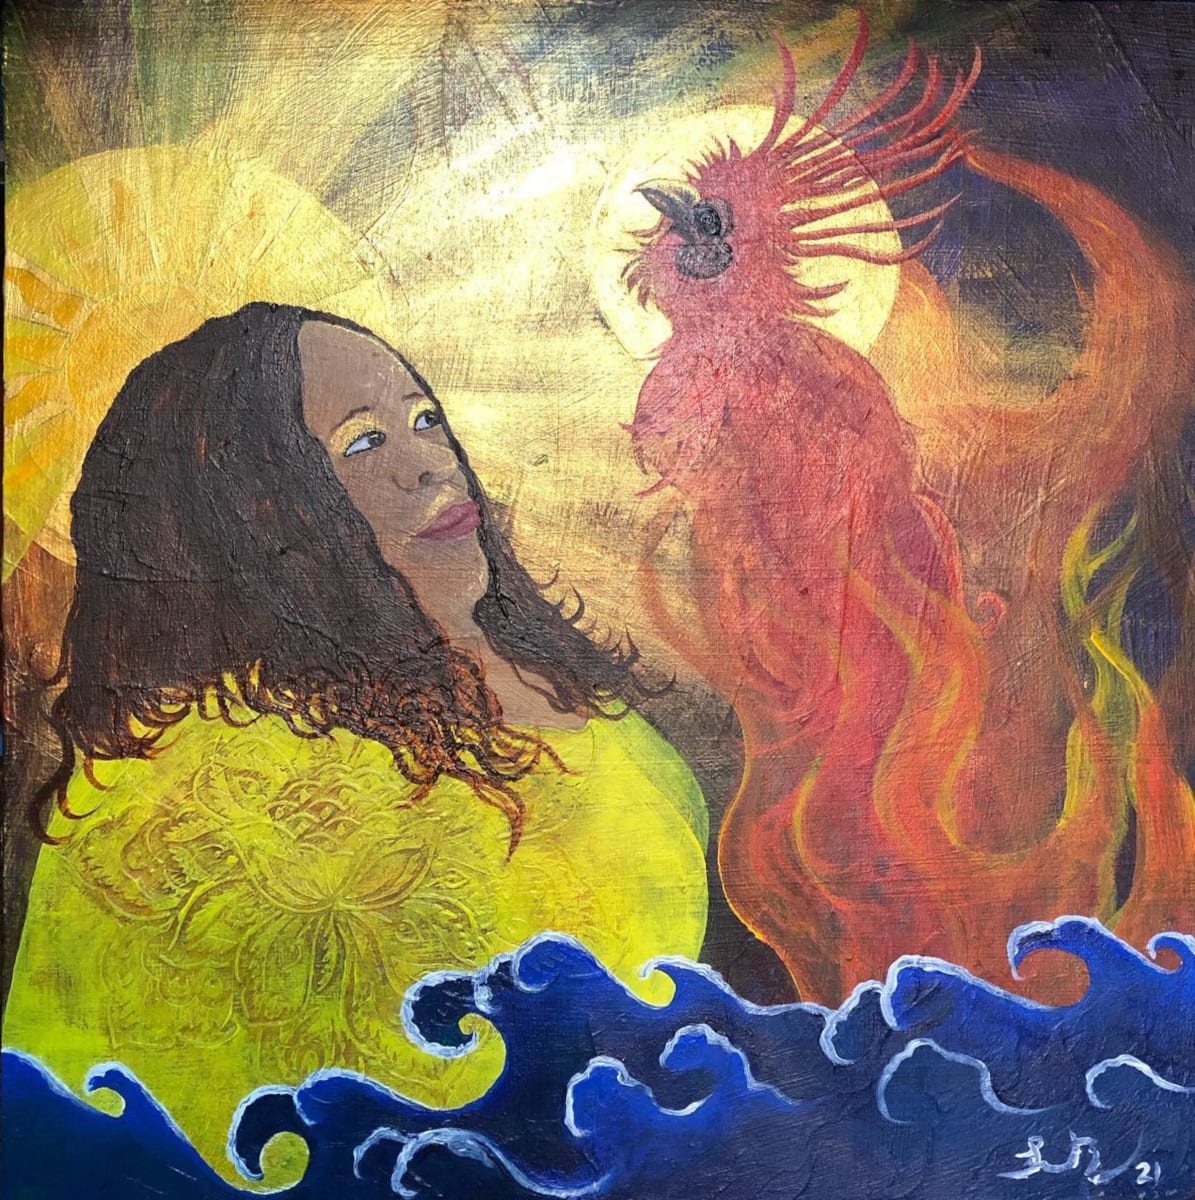 Phoenix Rising by Frances Byrd  Image: Phoenix Rising, Acrylic on Wood Panel, 12 x 12 inches, 2021